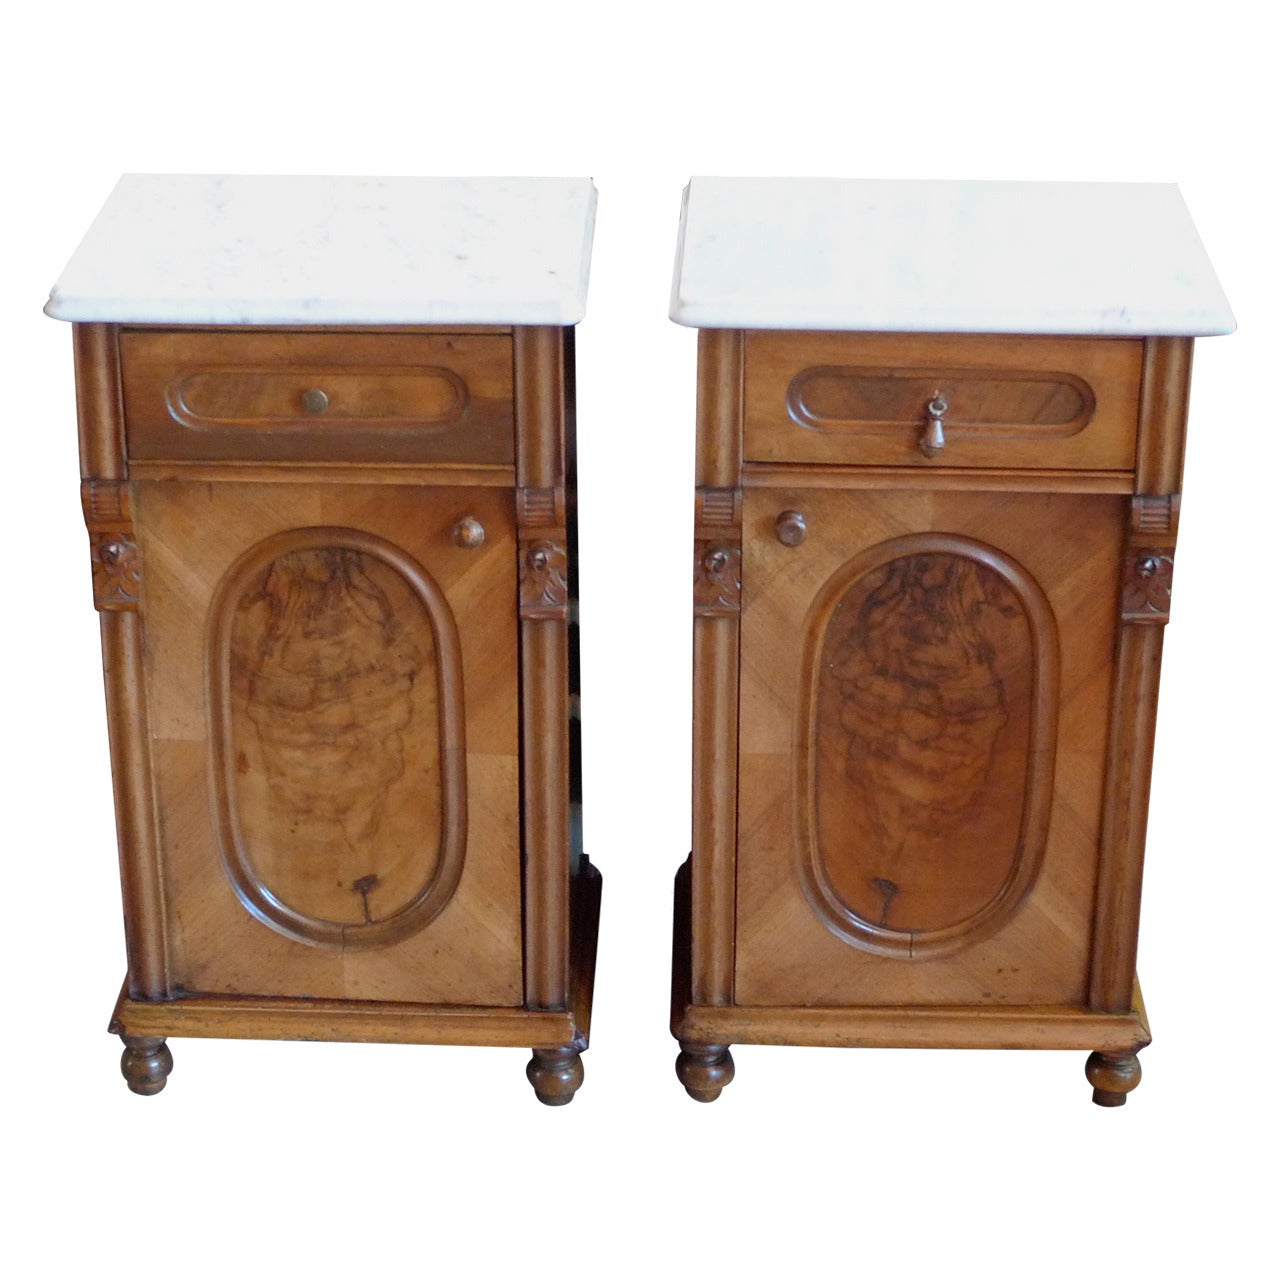 Two English 19th Century Nightstands with Marble Top, Single Door and One Drawer